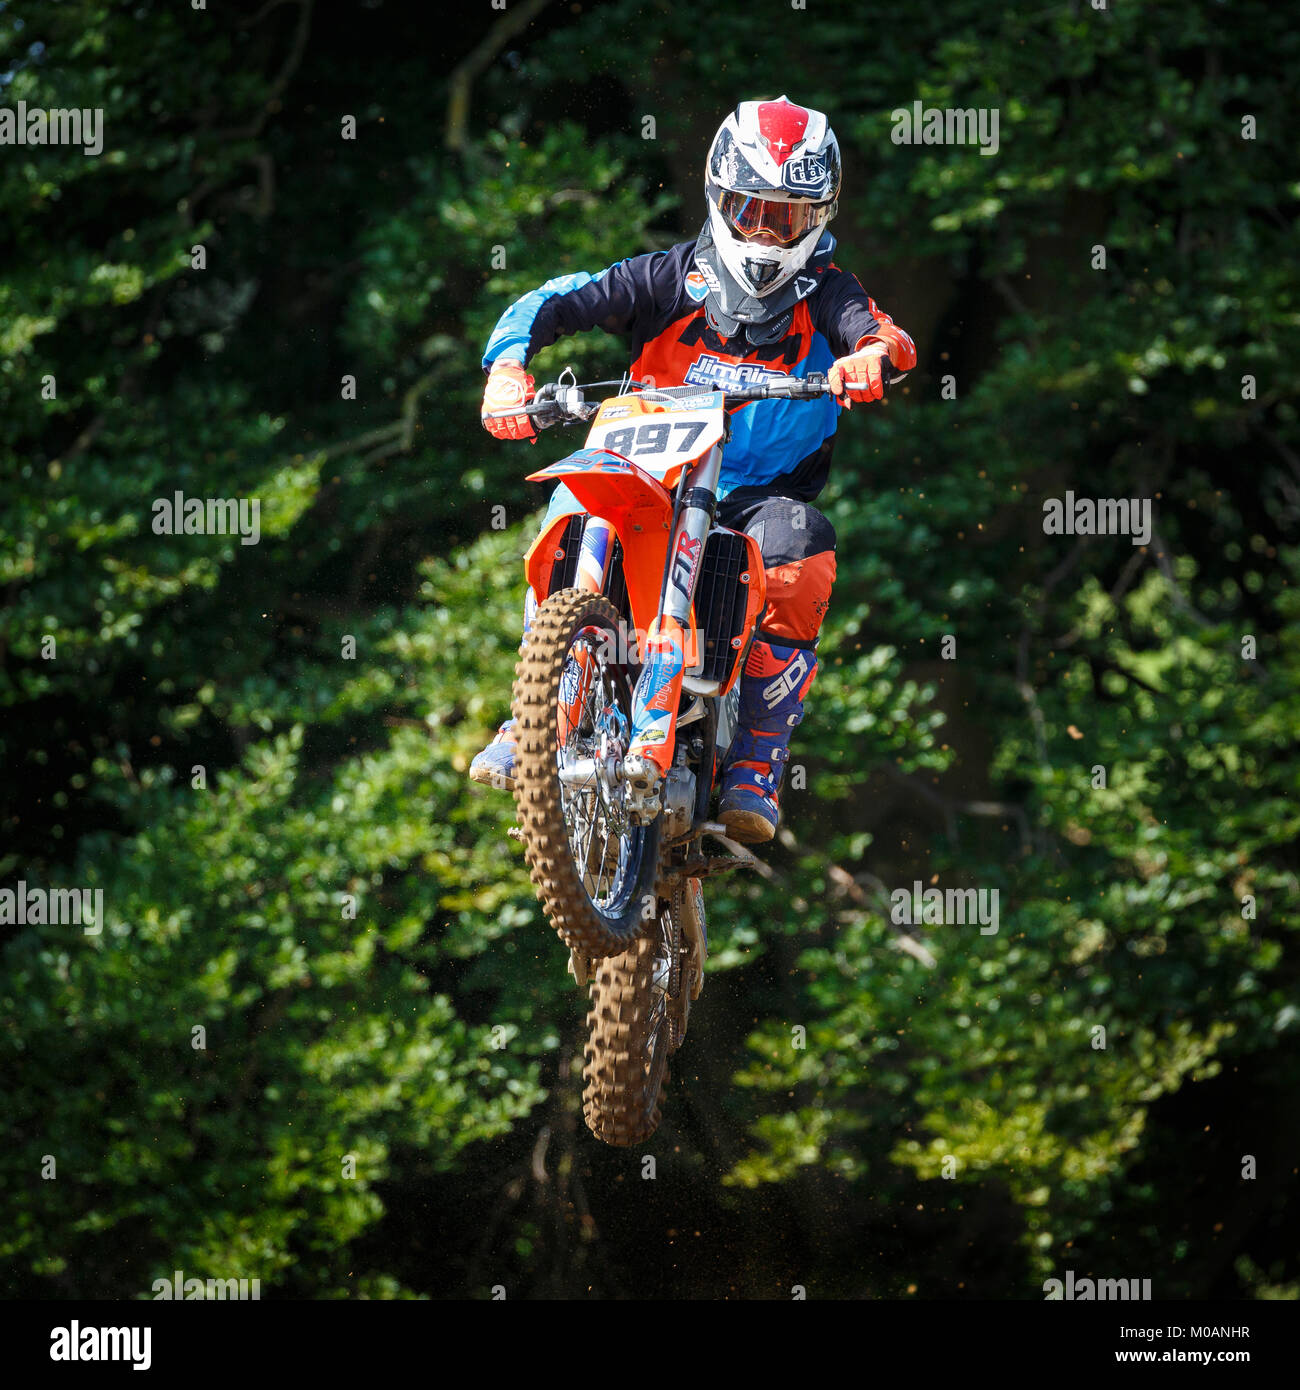 Harry Clark on the Jim Aim KTM 250 at the NGR & ACU Eastern EVO Championships, Cadders Hill, Lyng, Norfolk, UK. Stock Photo